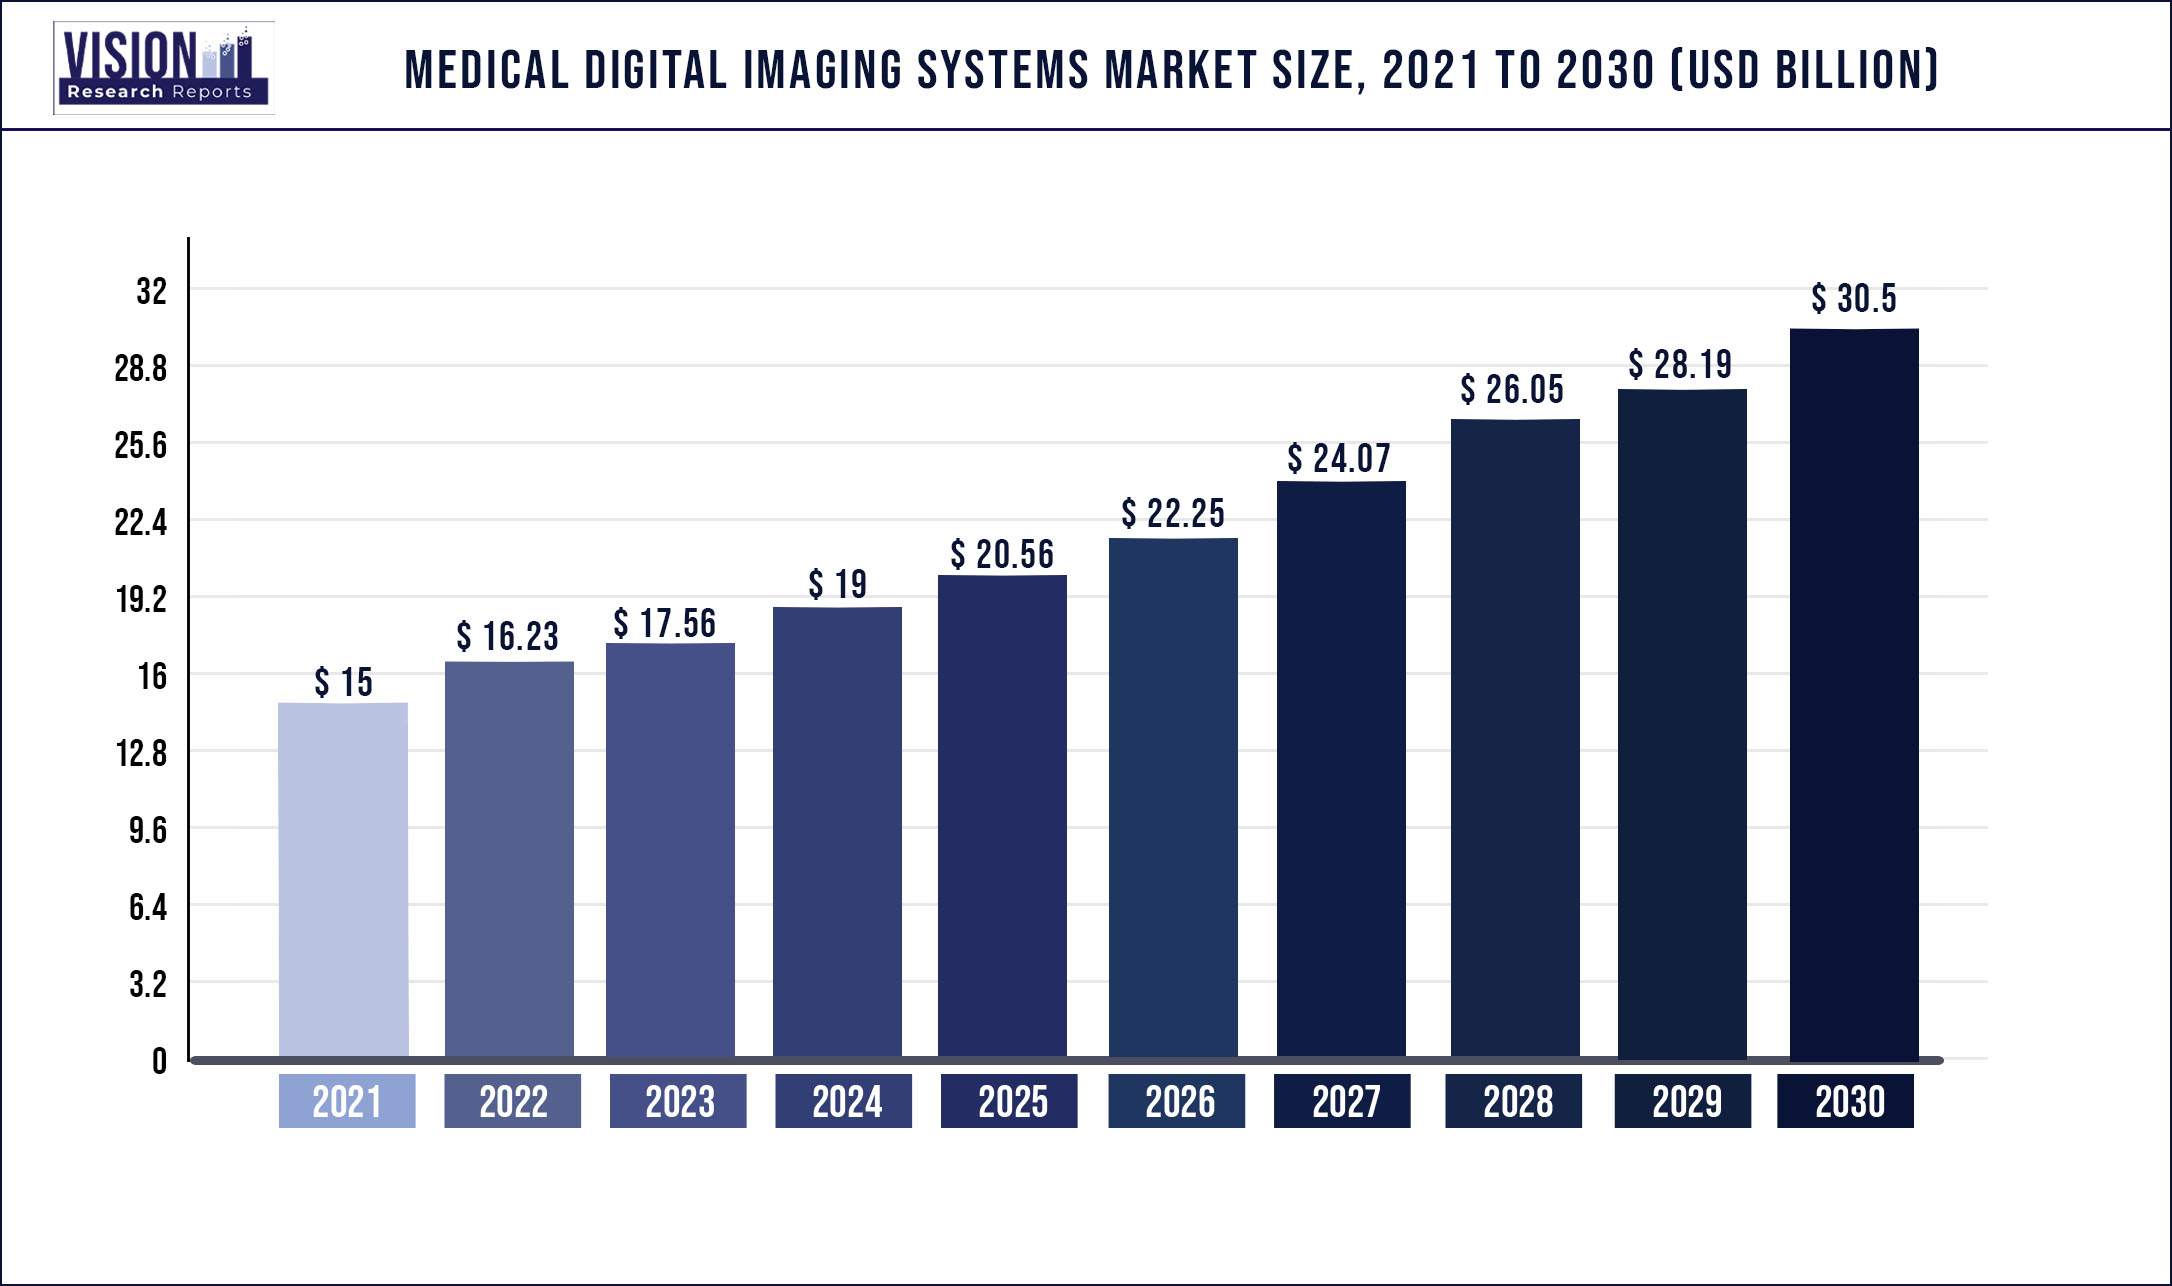 Medical Digital Imaging Systems Market Size 2021 to 2030